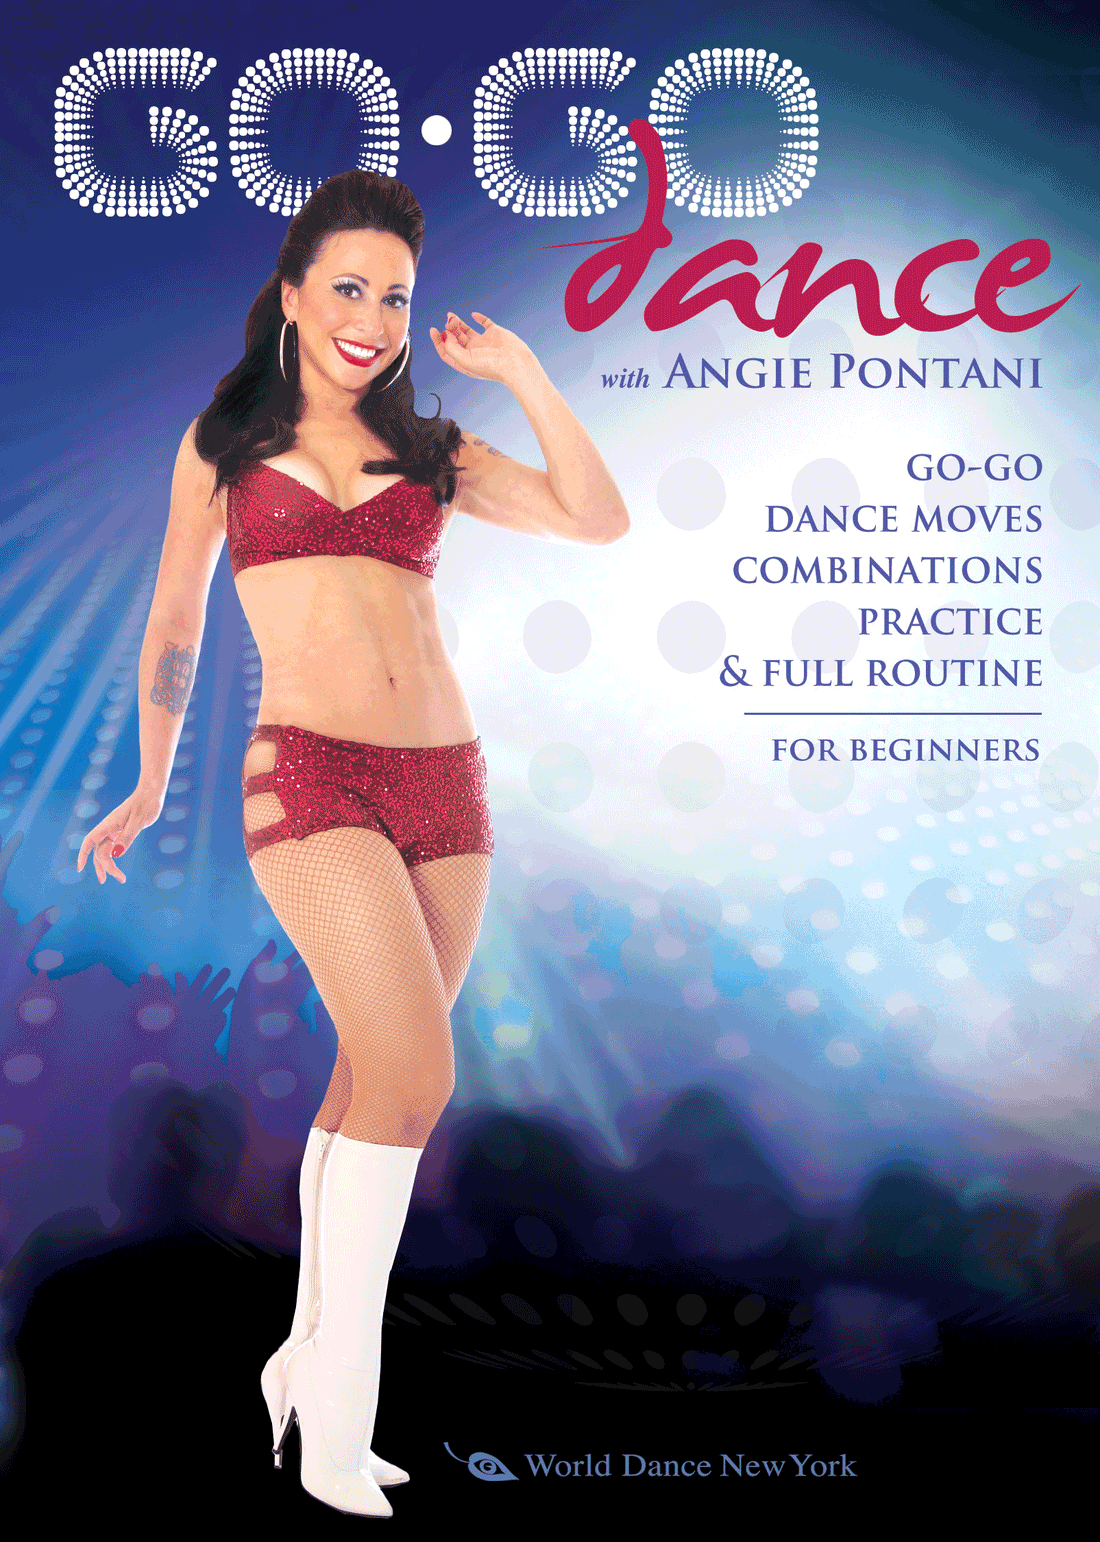 Go-Go Dance with Angie Pontani - sexy, high-energy, free-spirited - INSTANT VIDEO / DVD - World Dance New York